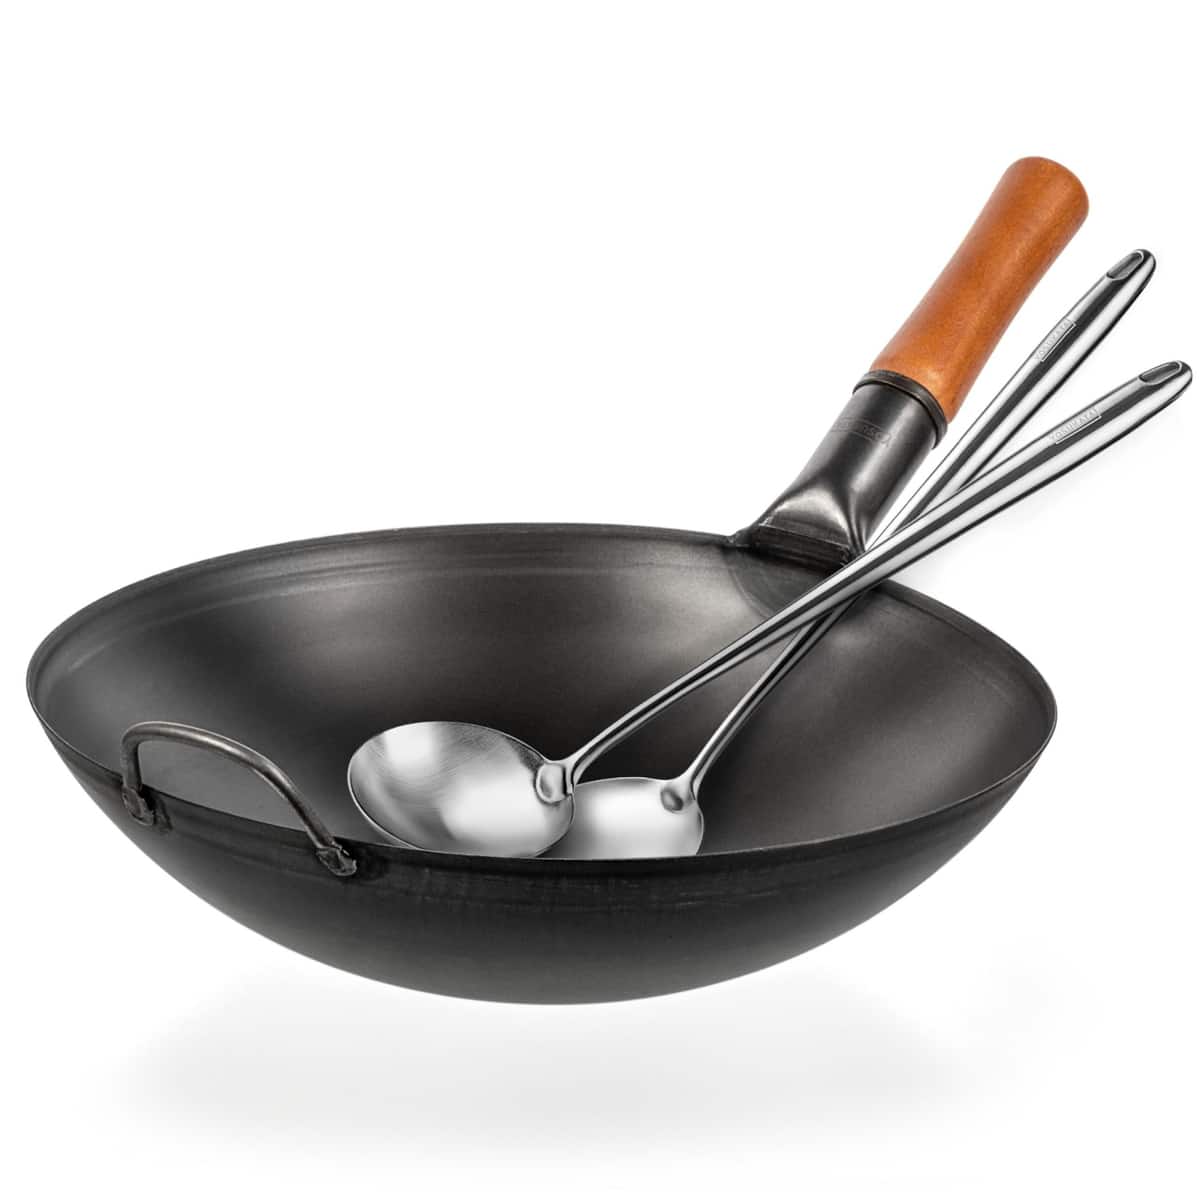 Seasoning Your Carbon Steel Wok Step-by-Step Instructions